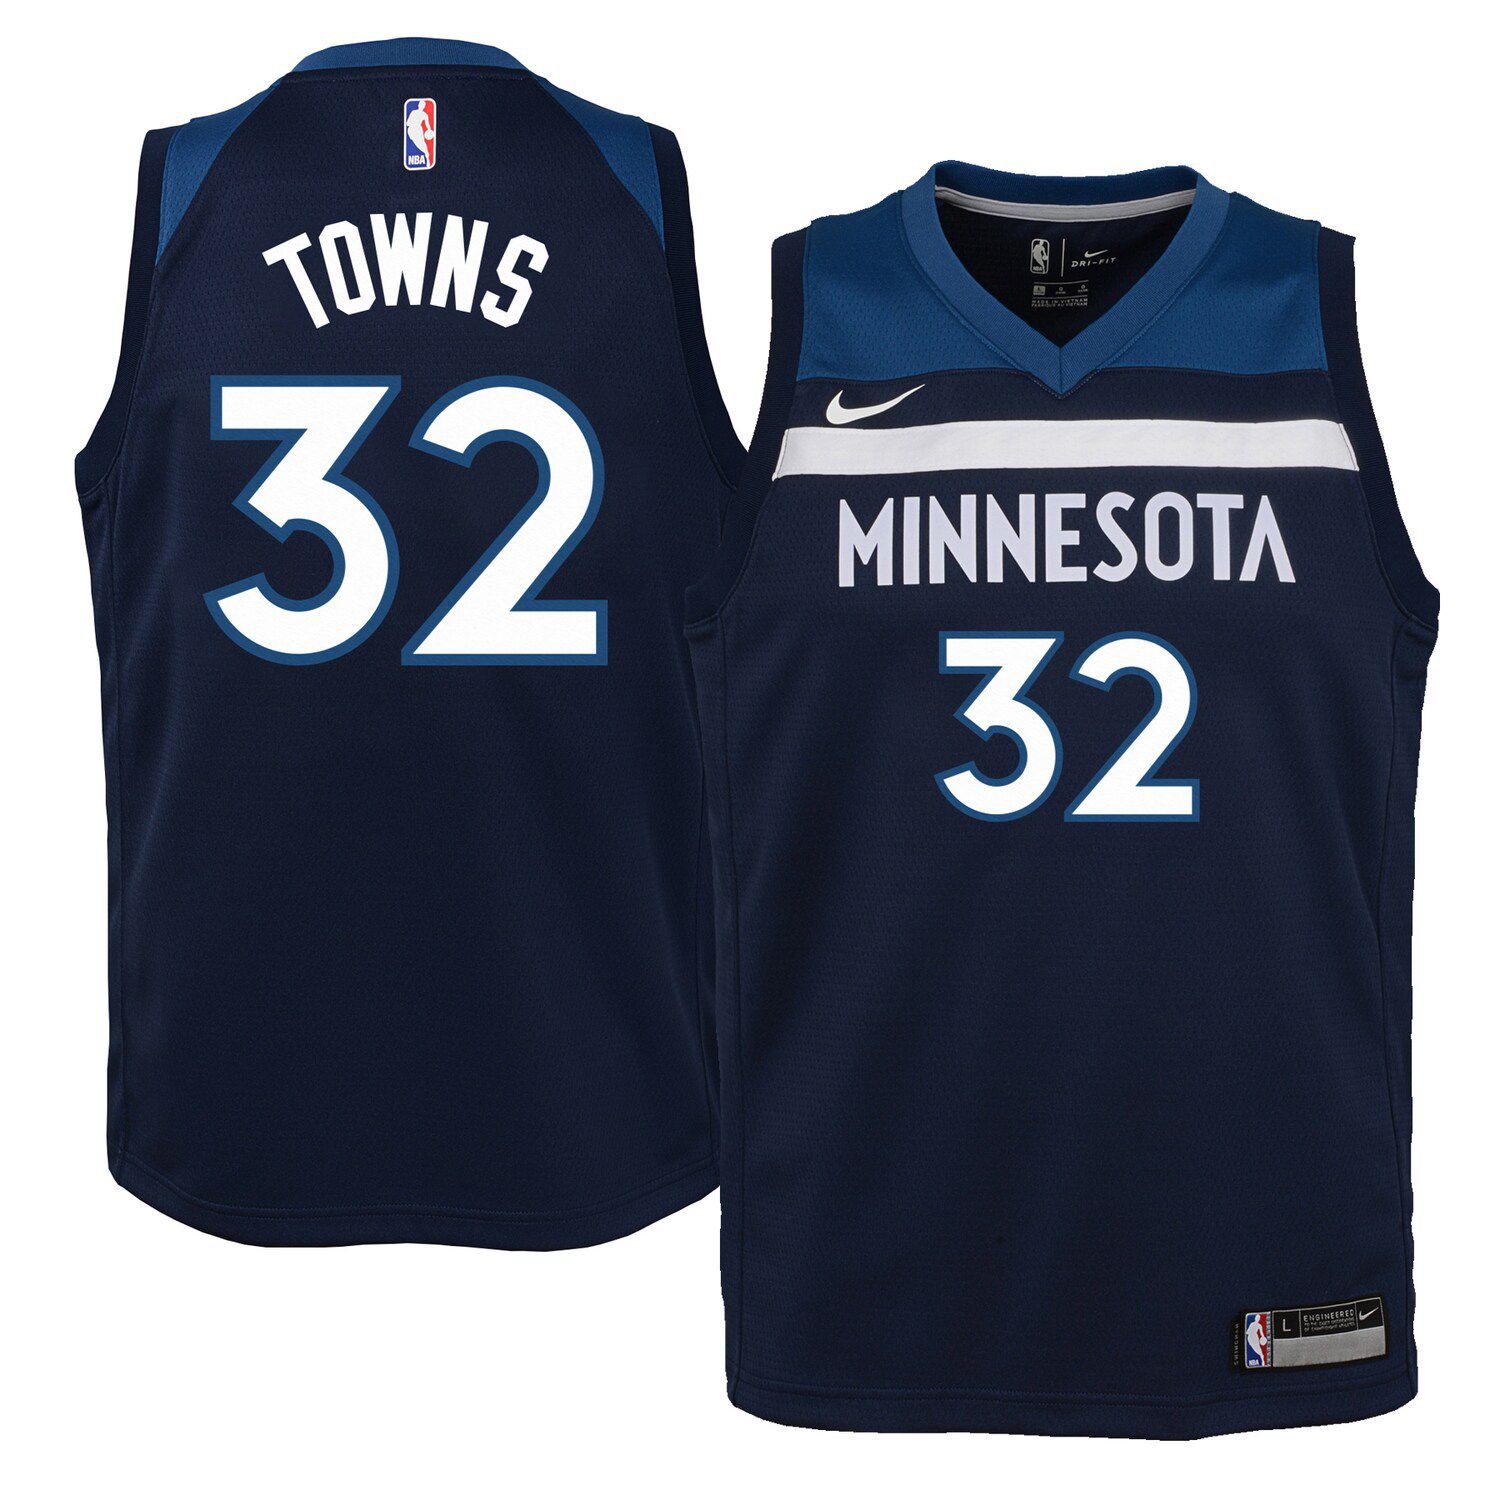 karl anthony towns jersey youth